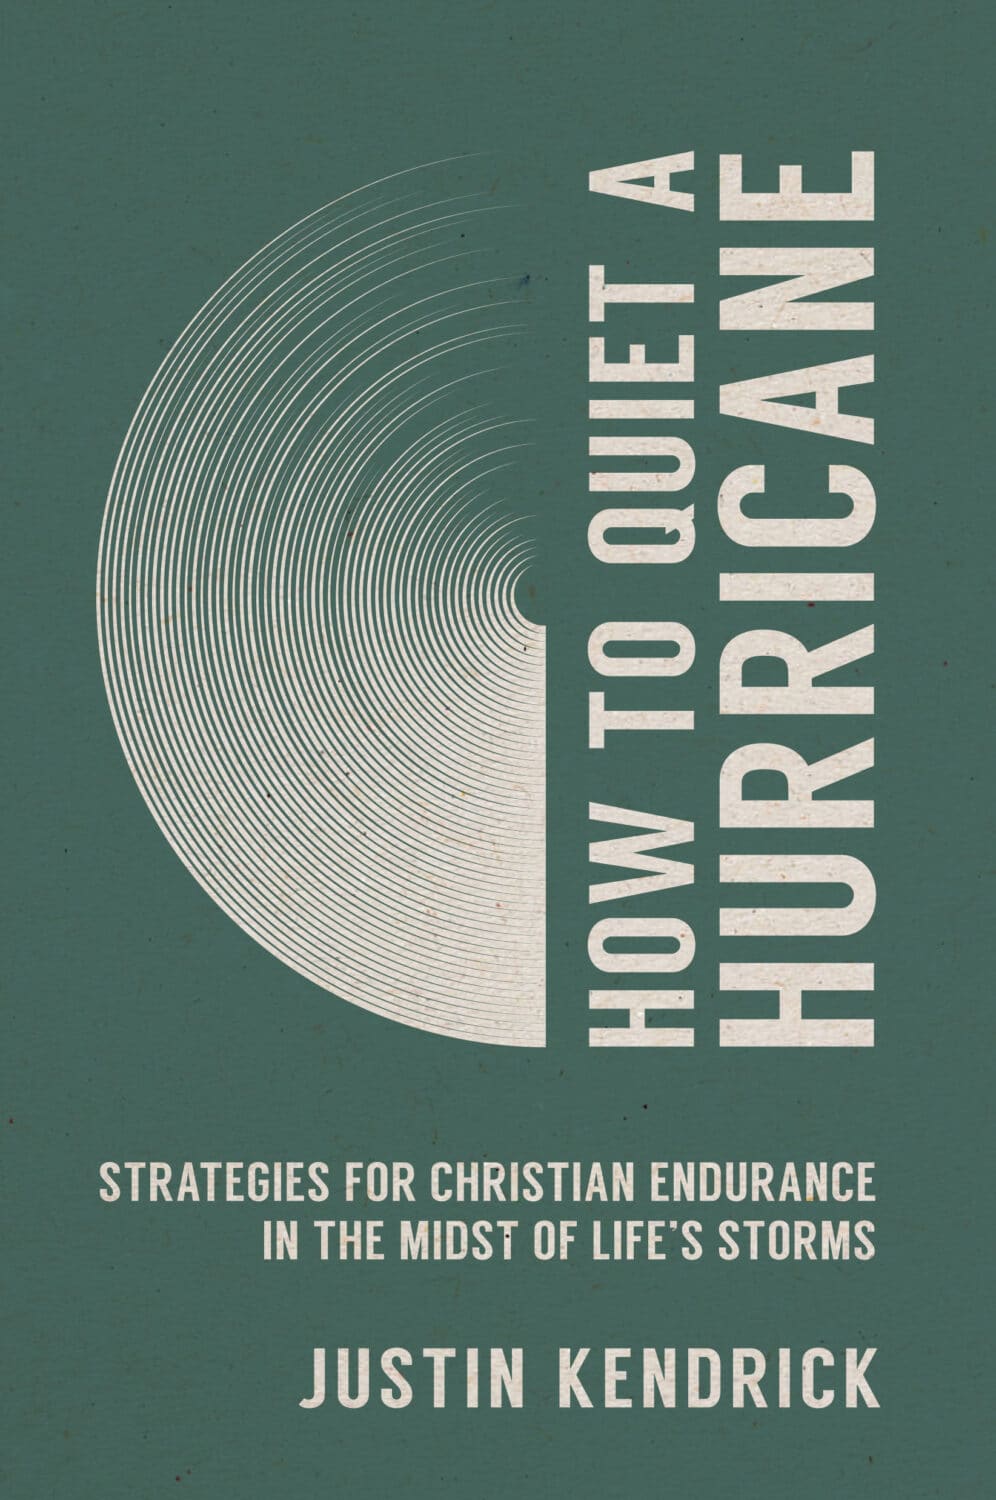 How to Quiet a Hurricane Book Cover.